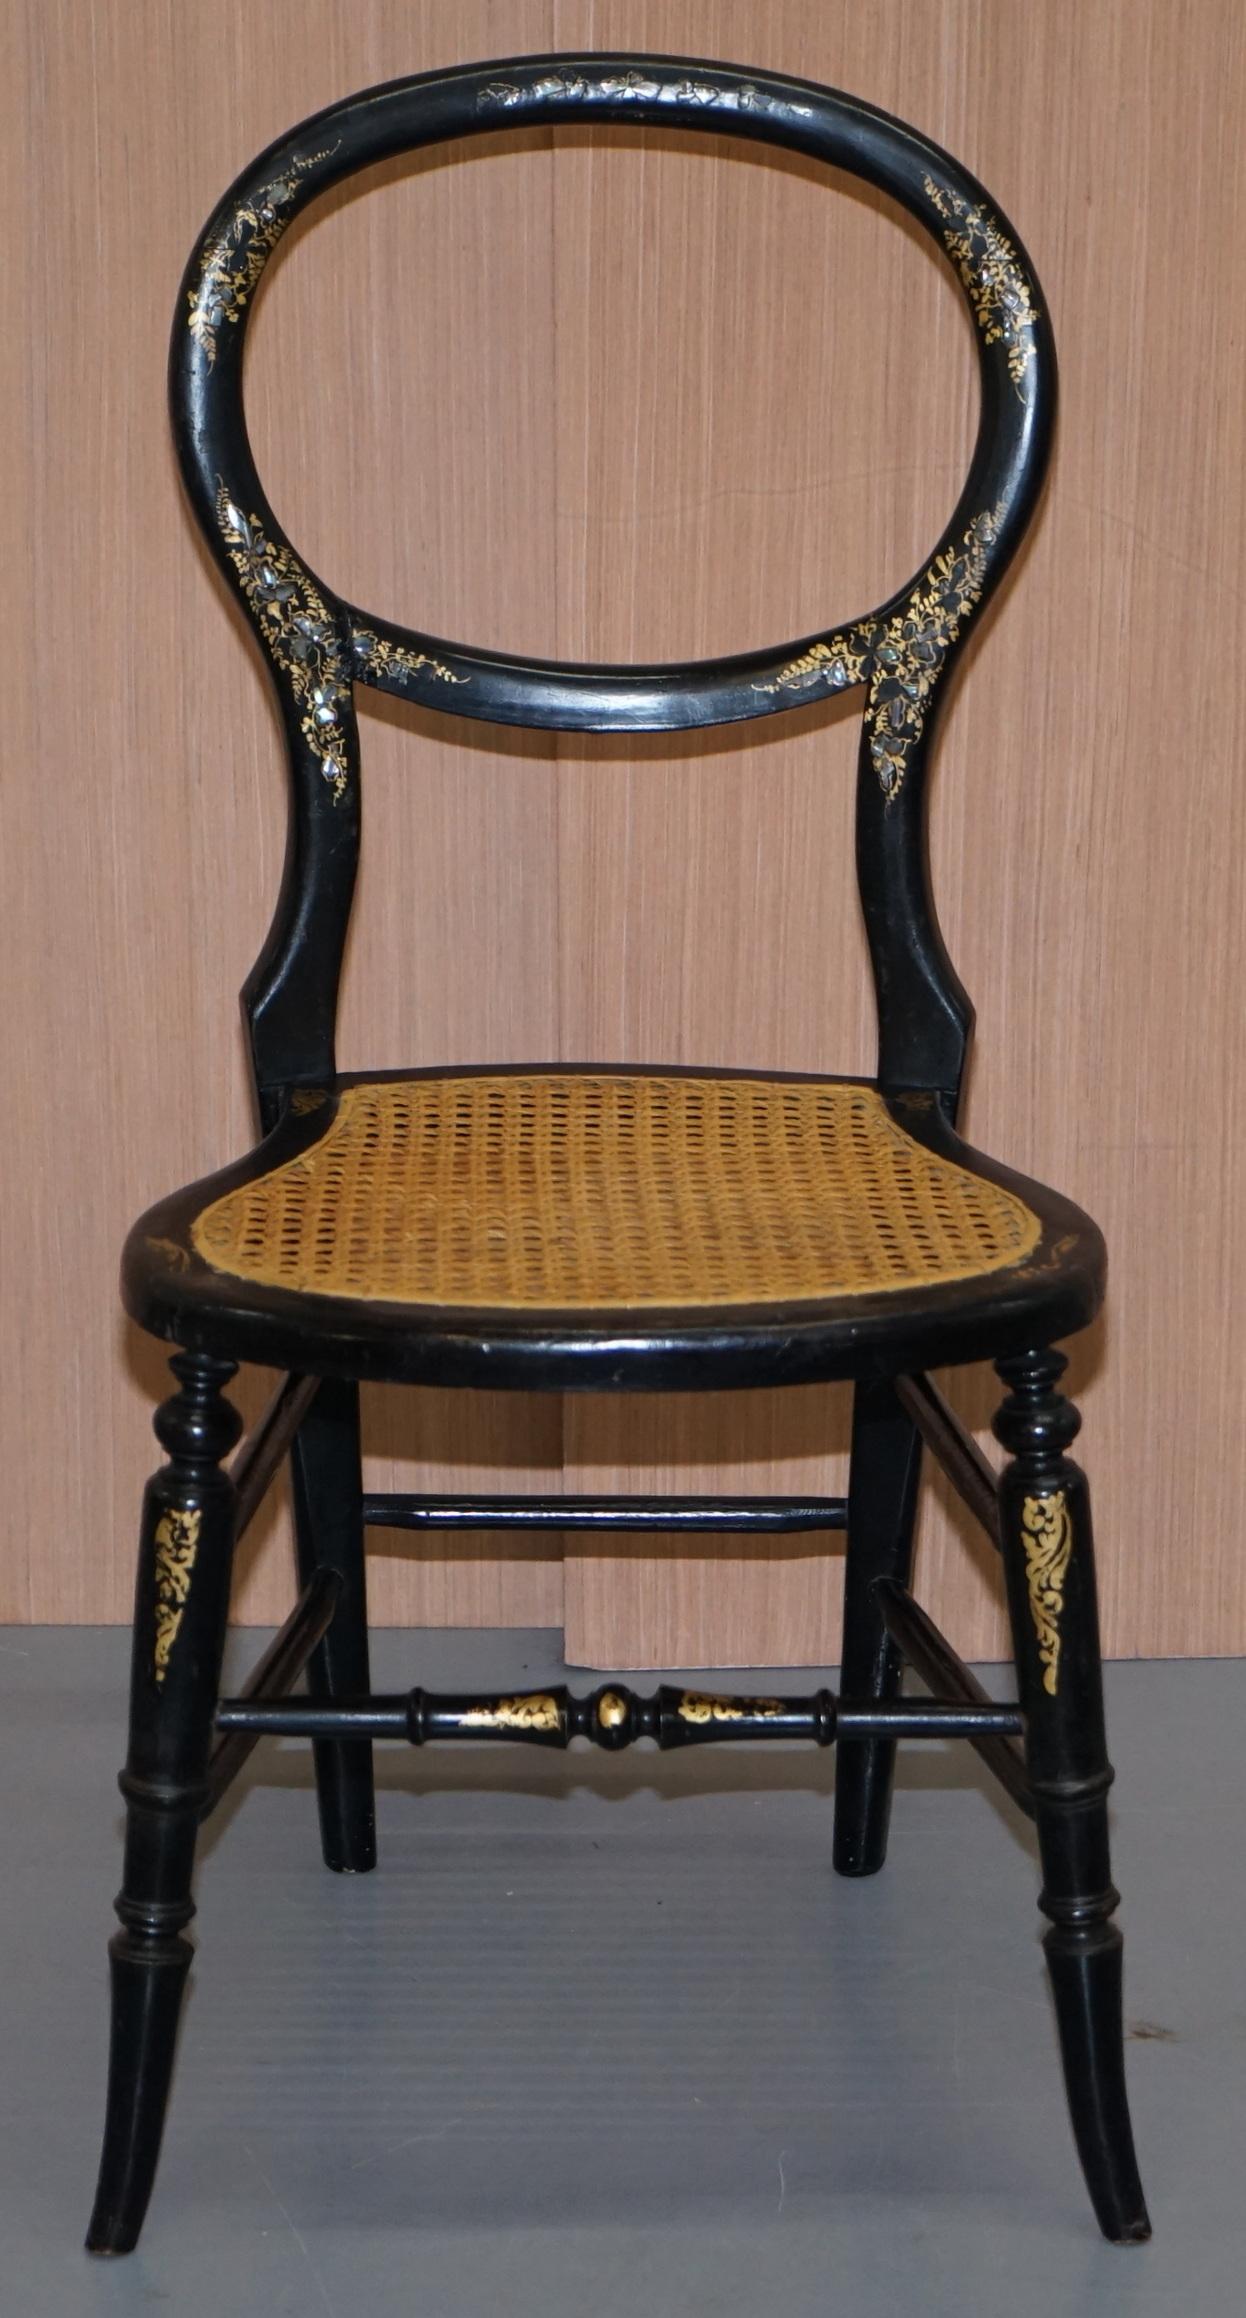 We are delighted to offer for sale this very rare circa 1810 Regency ebonized side chair with mother of pearl inlay, hand sawn 

This chair is one of a pair, I have another which is slightly different listed under my other items

This one is